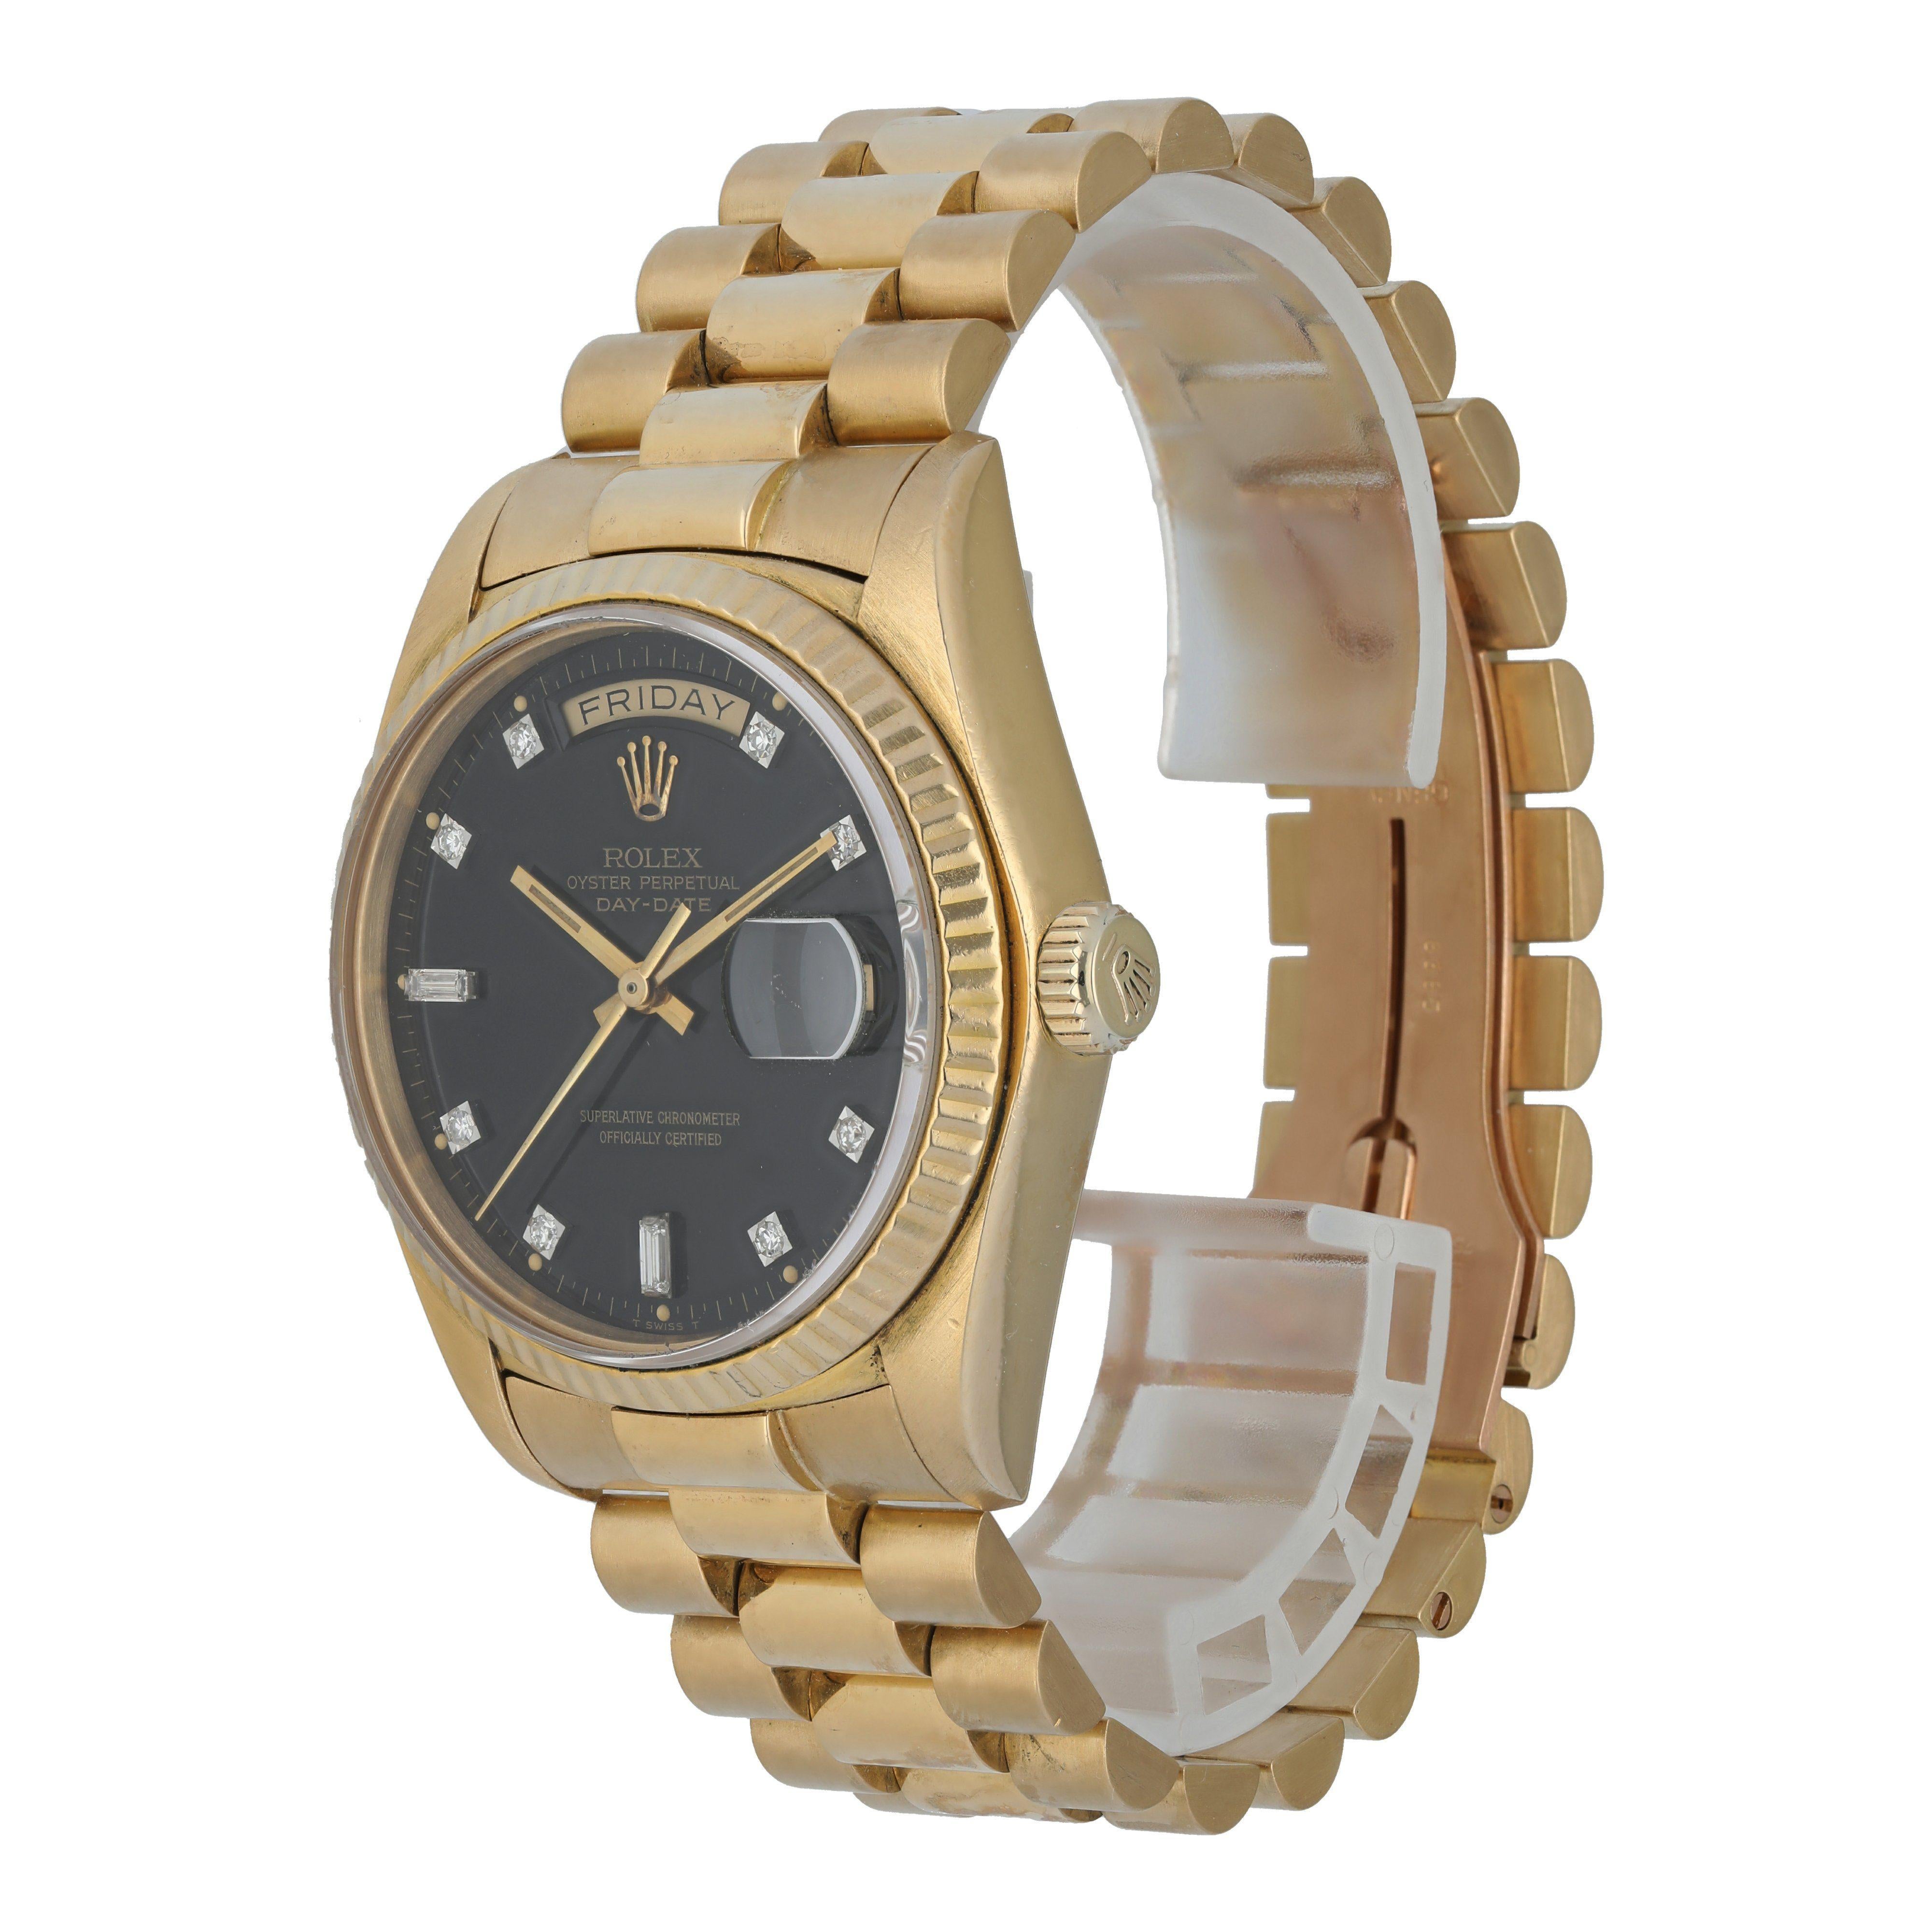 Rolex Day-Date 18038 Diamond Dial Men's Watch.
36mm yellow gold case with a stationary fluted bezel.
Black dial with gold hands and factory set diamond hour markers. Gold oyster bracelet with a fold-over clasp.
Will fit up to a 7-inch wrist.